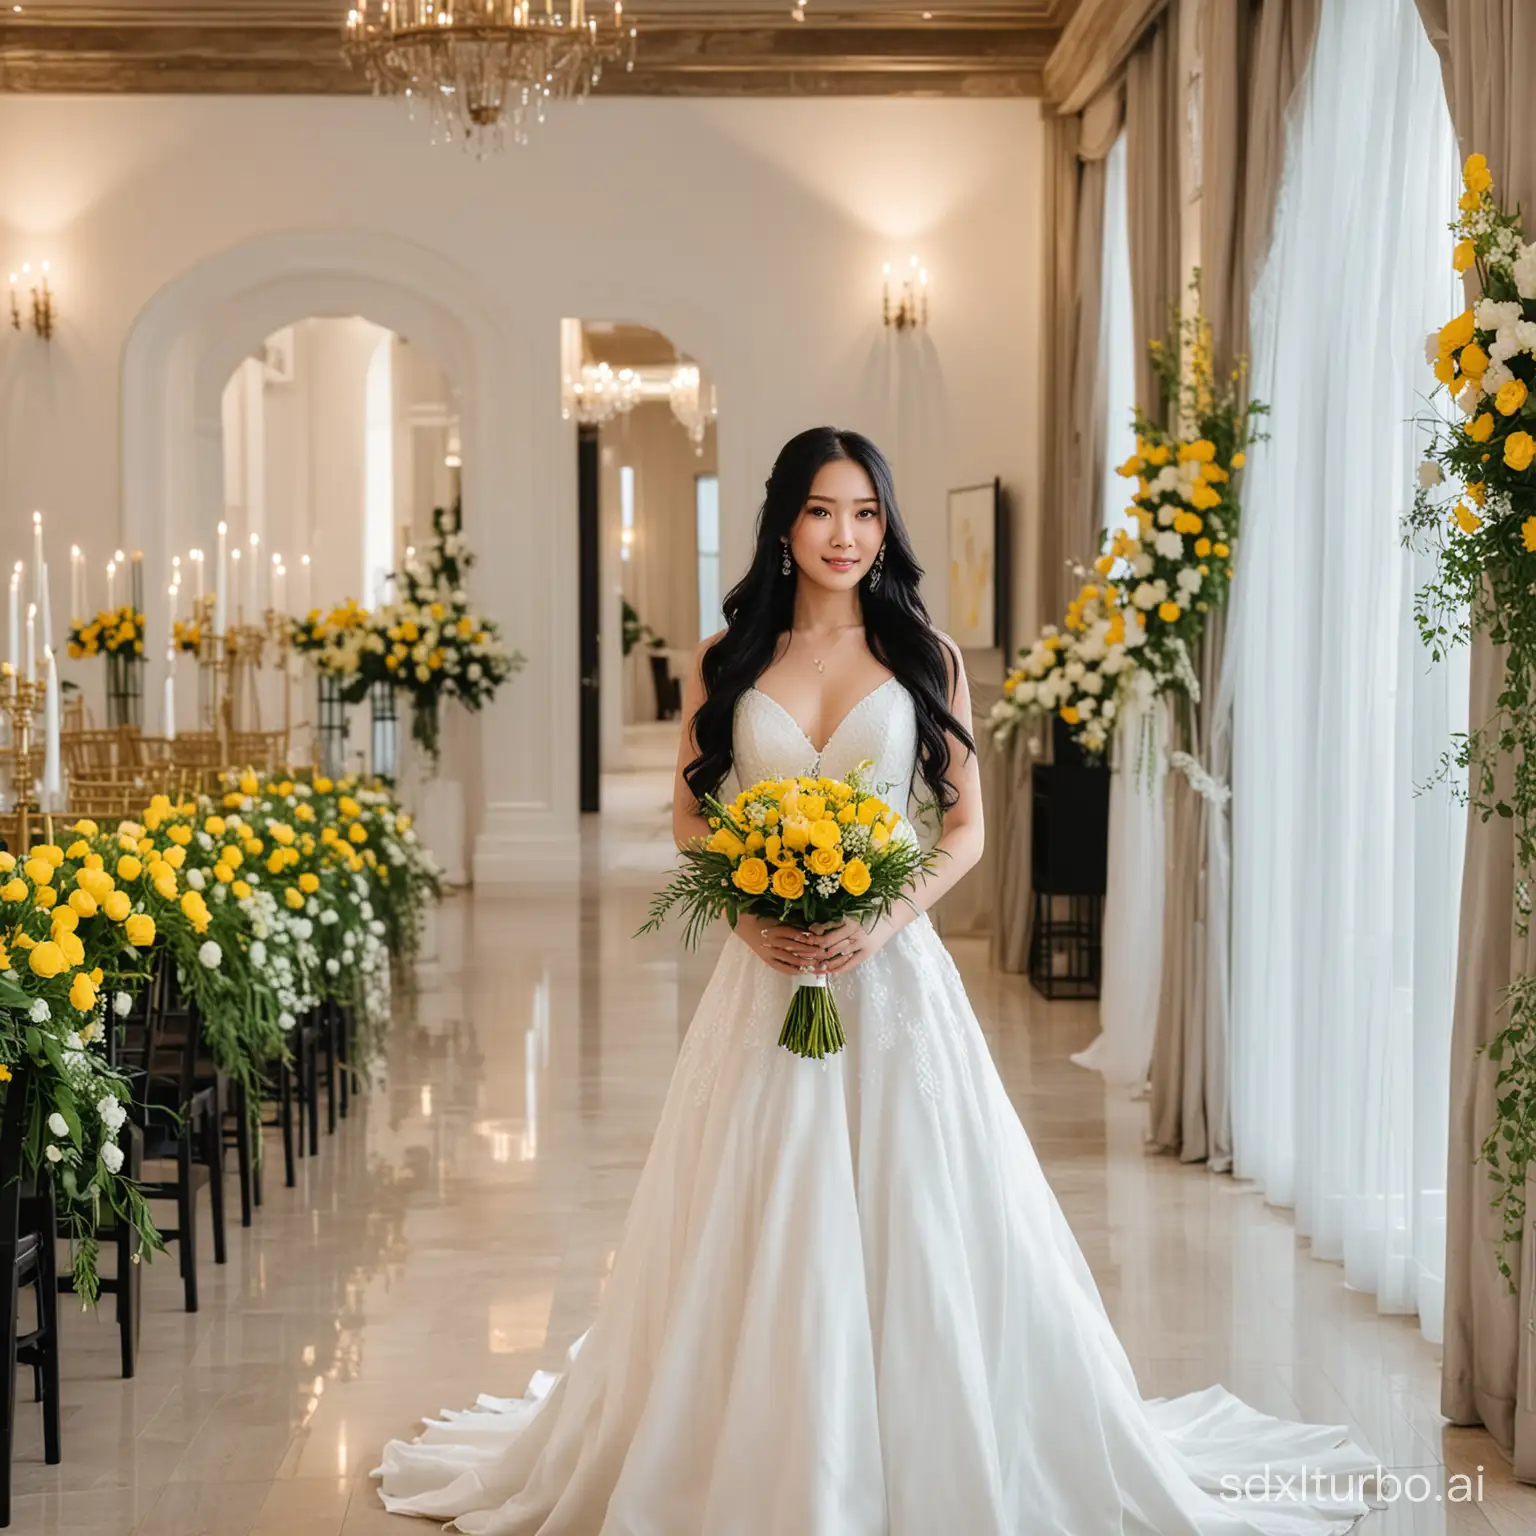 A beautiful Asian girl with yellow skin, raven black long hair, wearing a white wedding dress, holding a bouquet of flowers, enters the wedding hall.